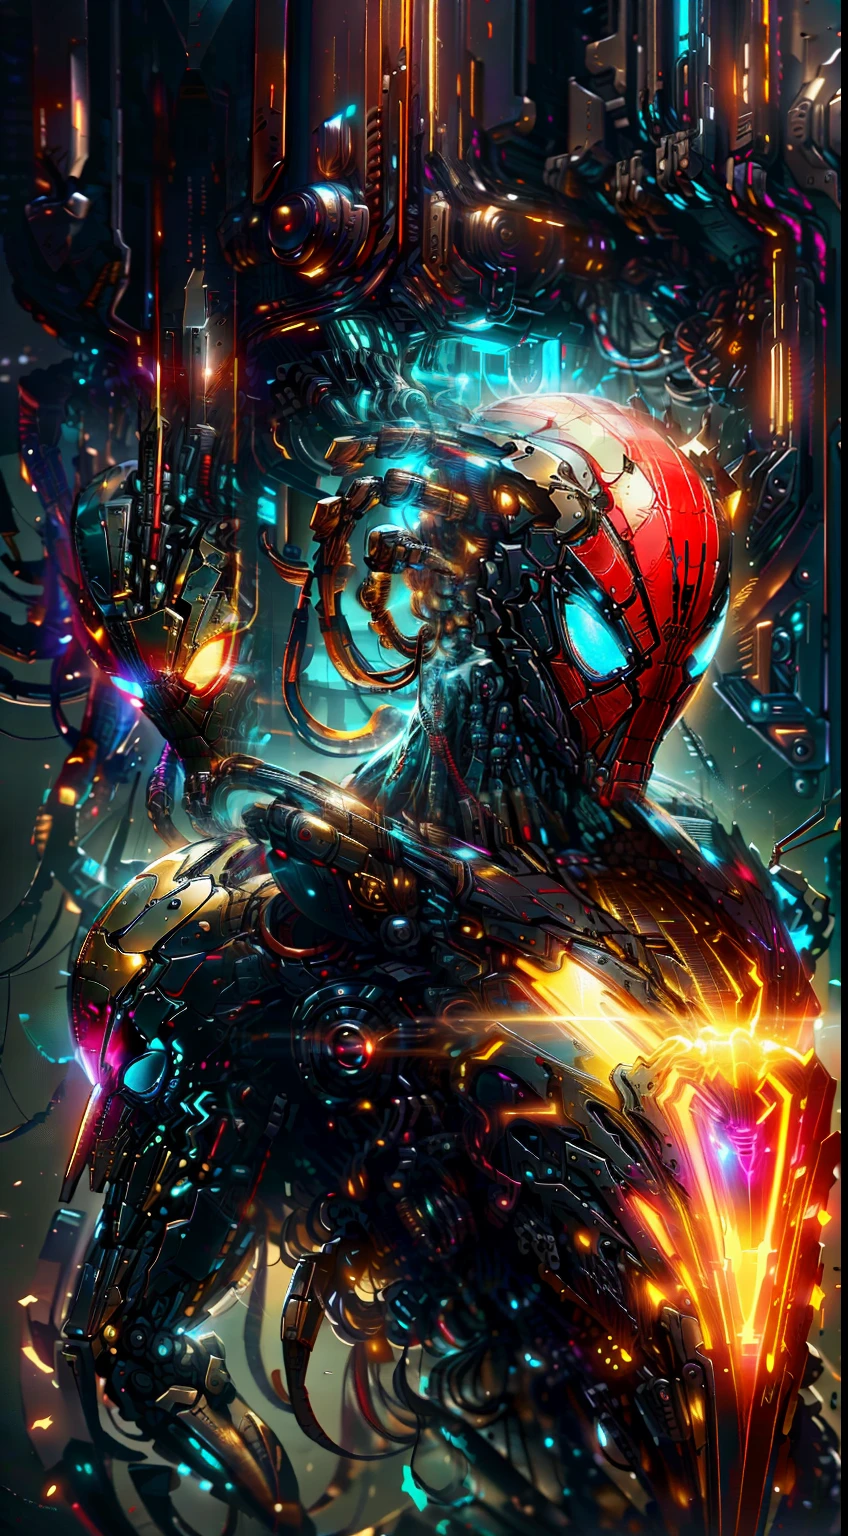 Spiderman from Marvel photography, biomechanics, complex robots, gold spiderman logo, full growth, hyper-realistic, crazy little details, incredibly clean lines, cyberpunk aesthetic, masterpiece featured on Zbrush Central